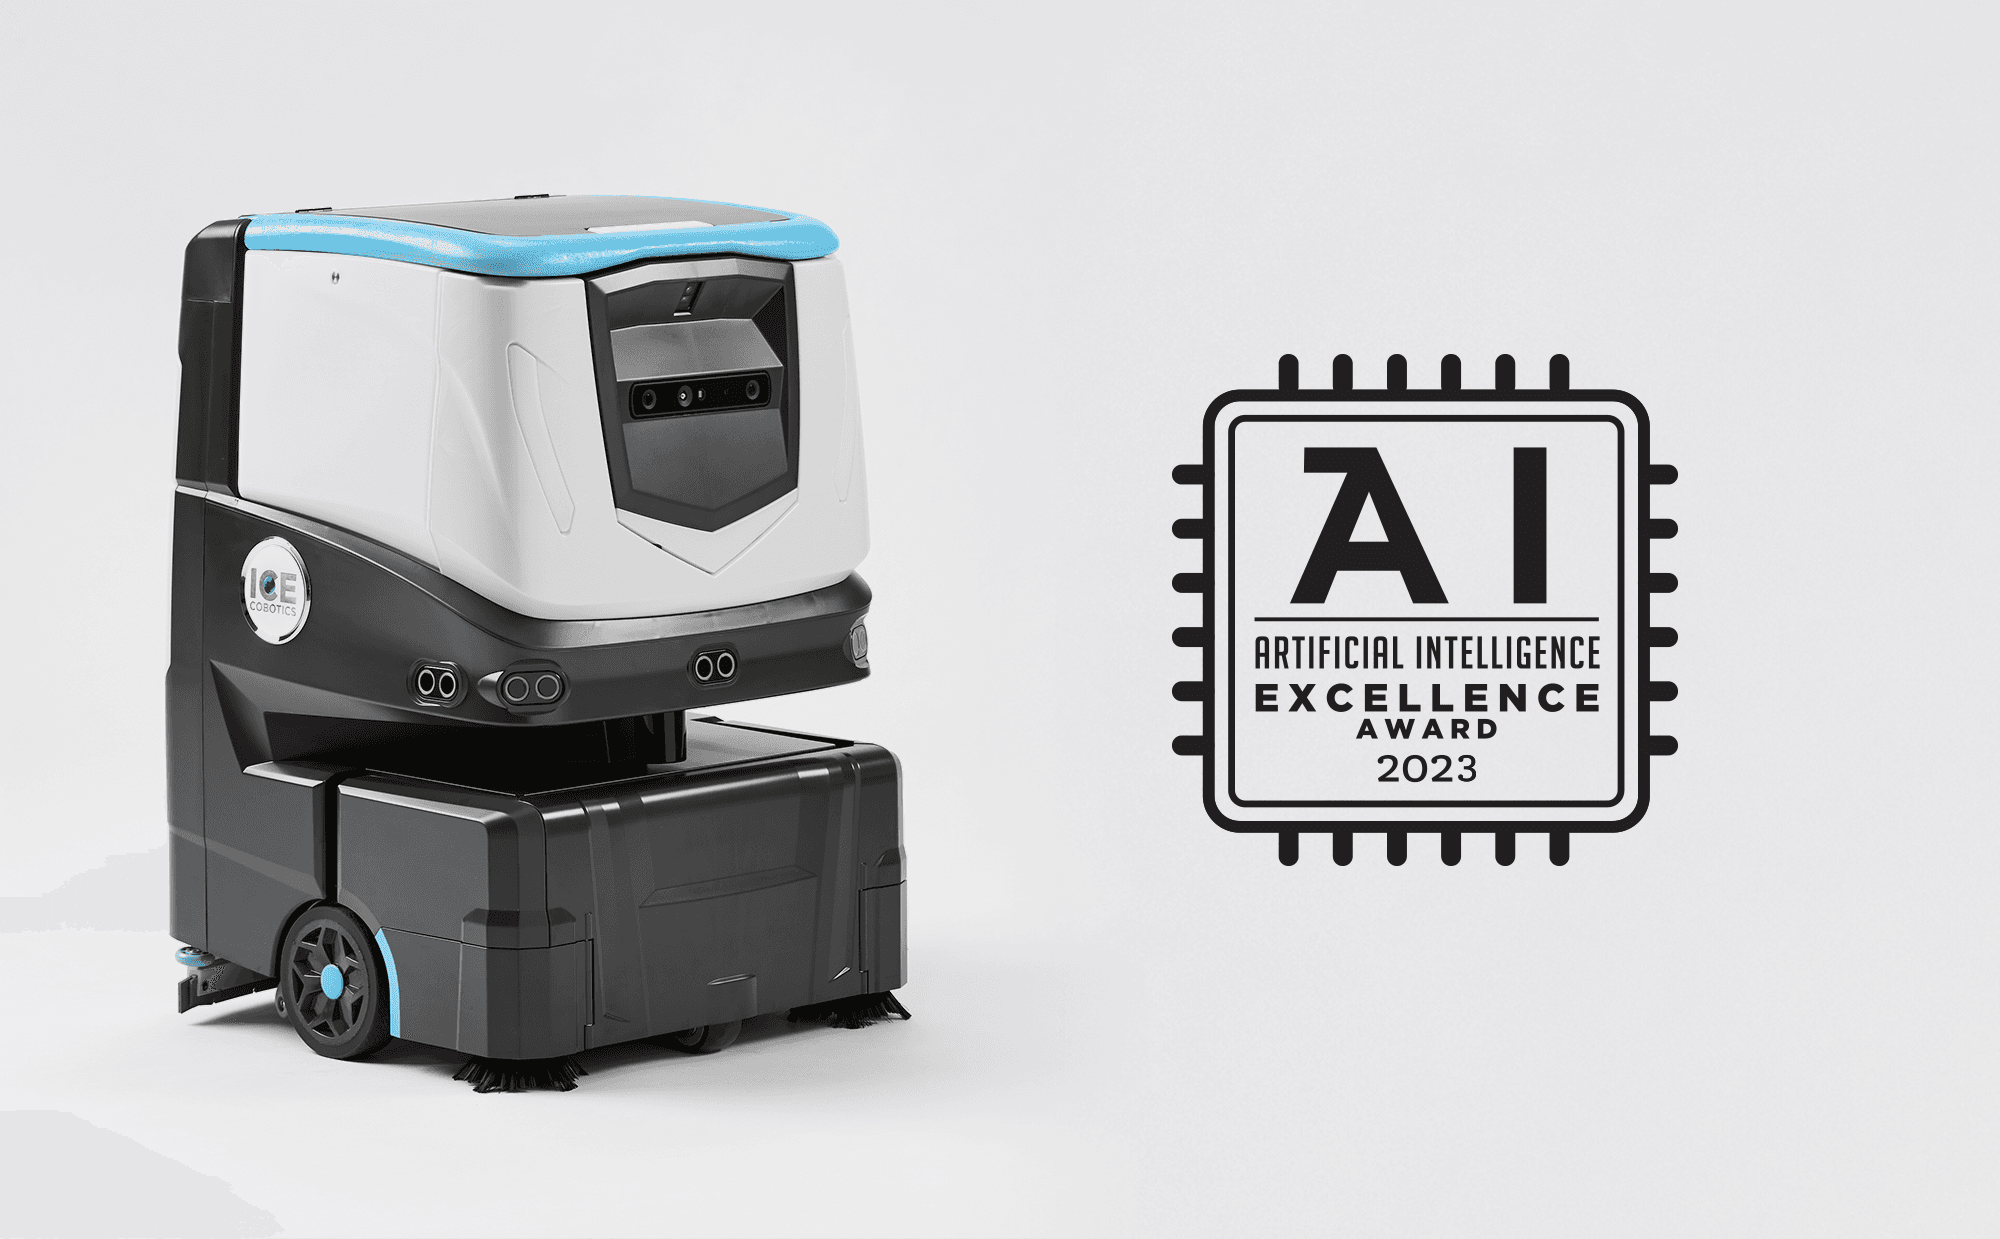 Say hello to Cobi, robotic floor scrubber, automation excellence winner 